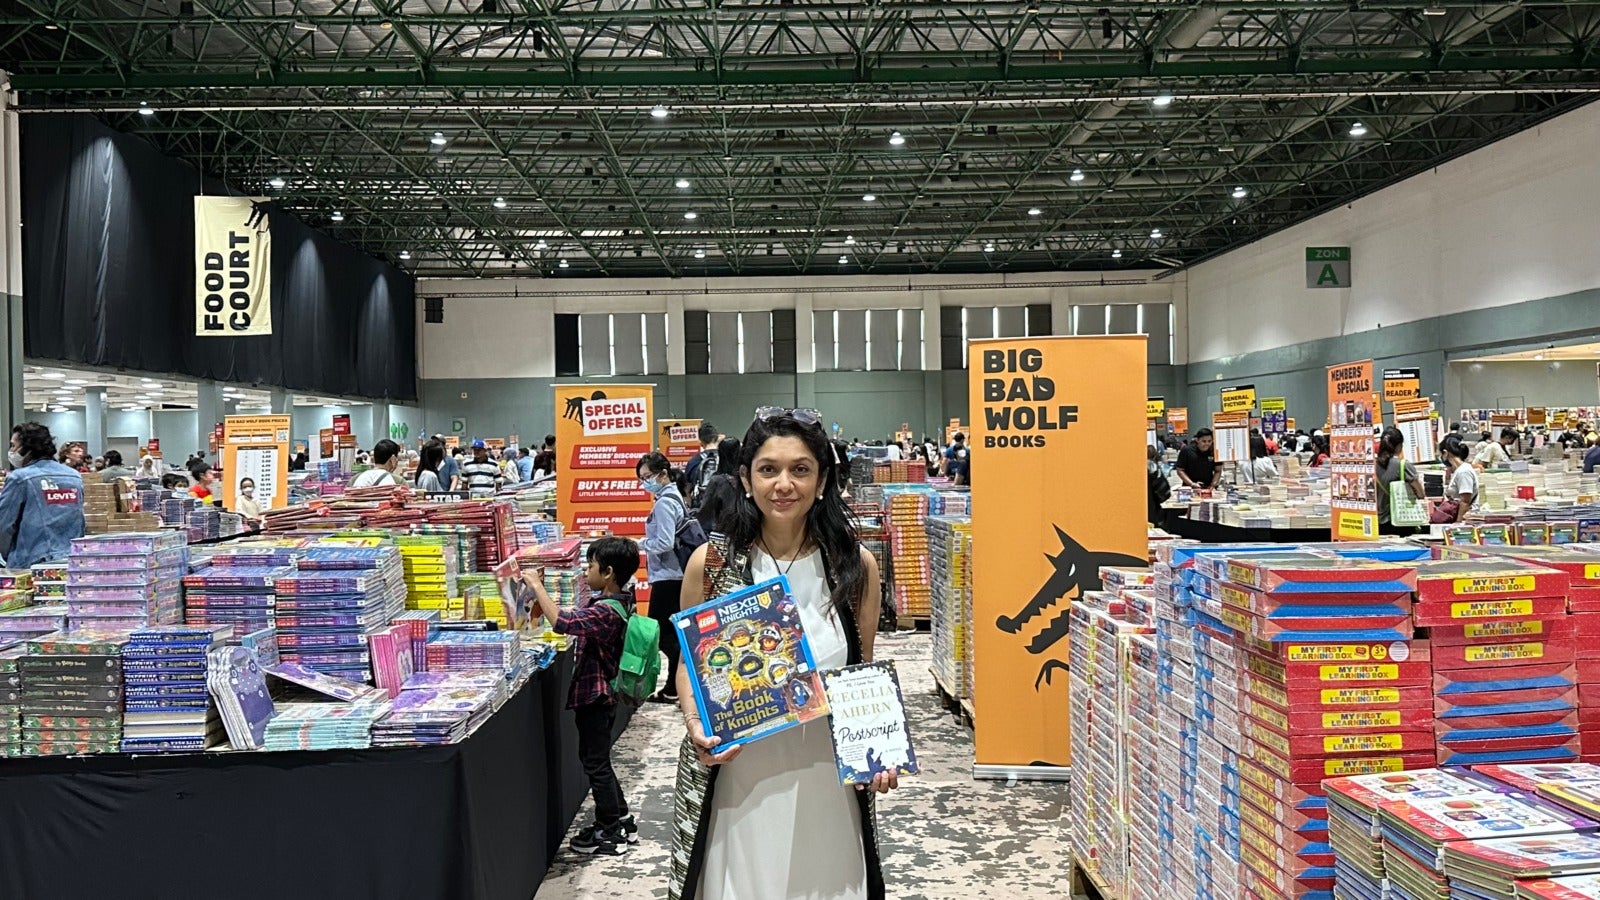 Ms Geetha Nair Head of PR at Big Bad Wolf Books showing some of the books available at the Big Bad Wolf Book Sale Kuala Lumpur 2022